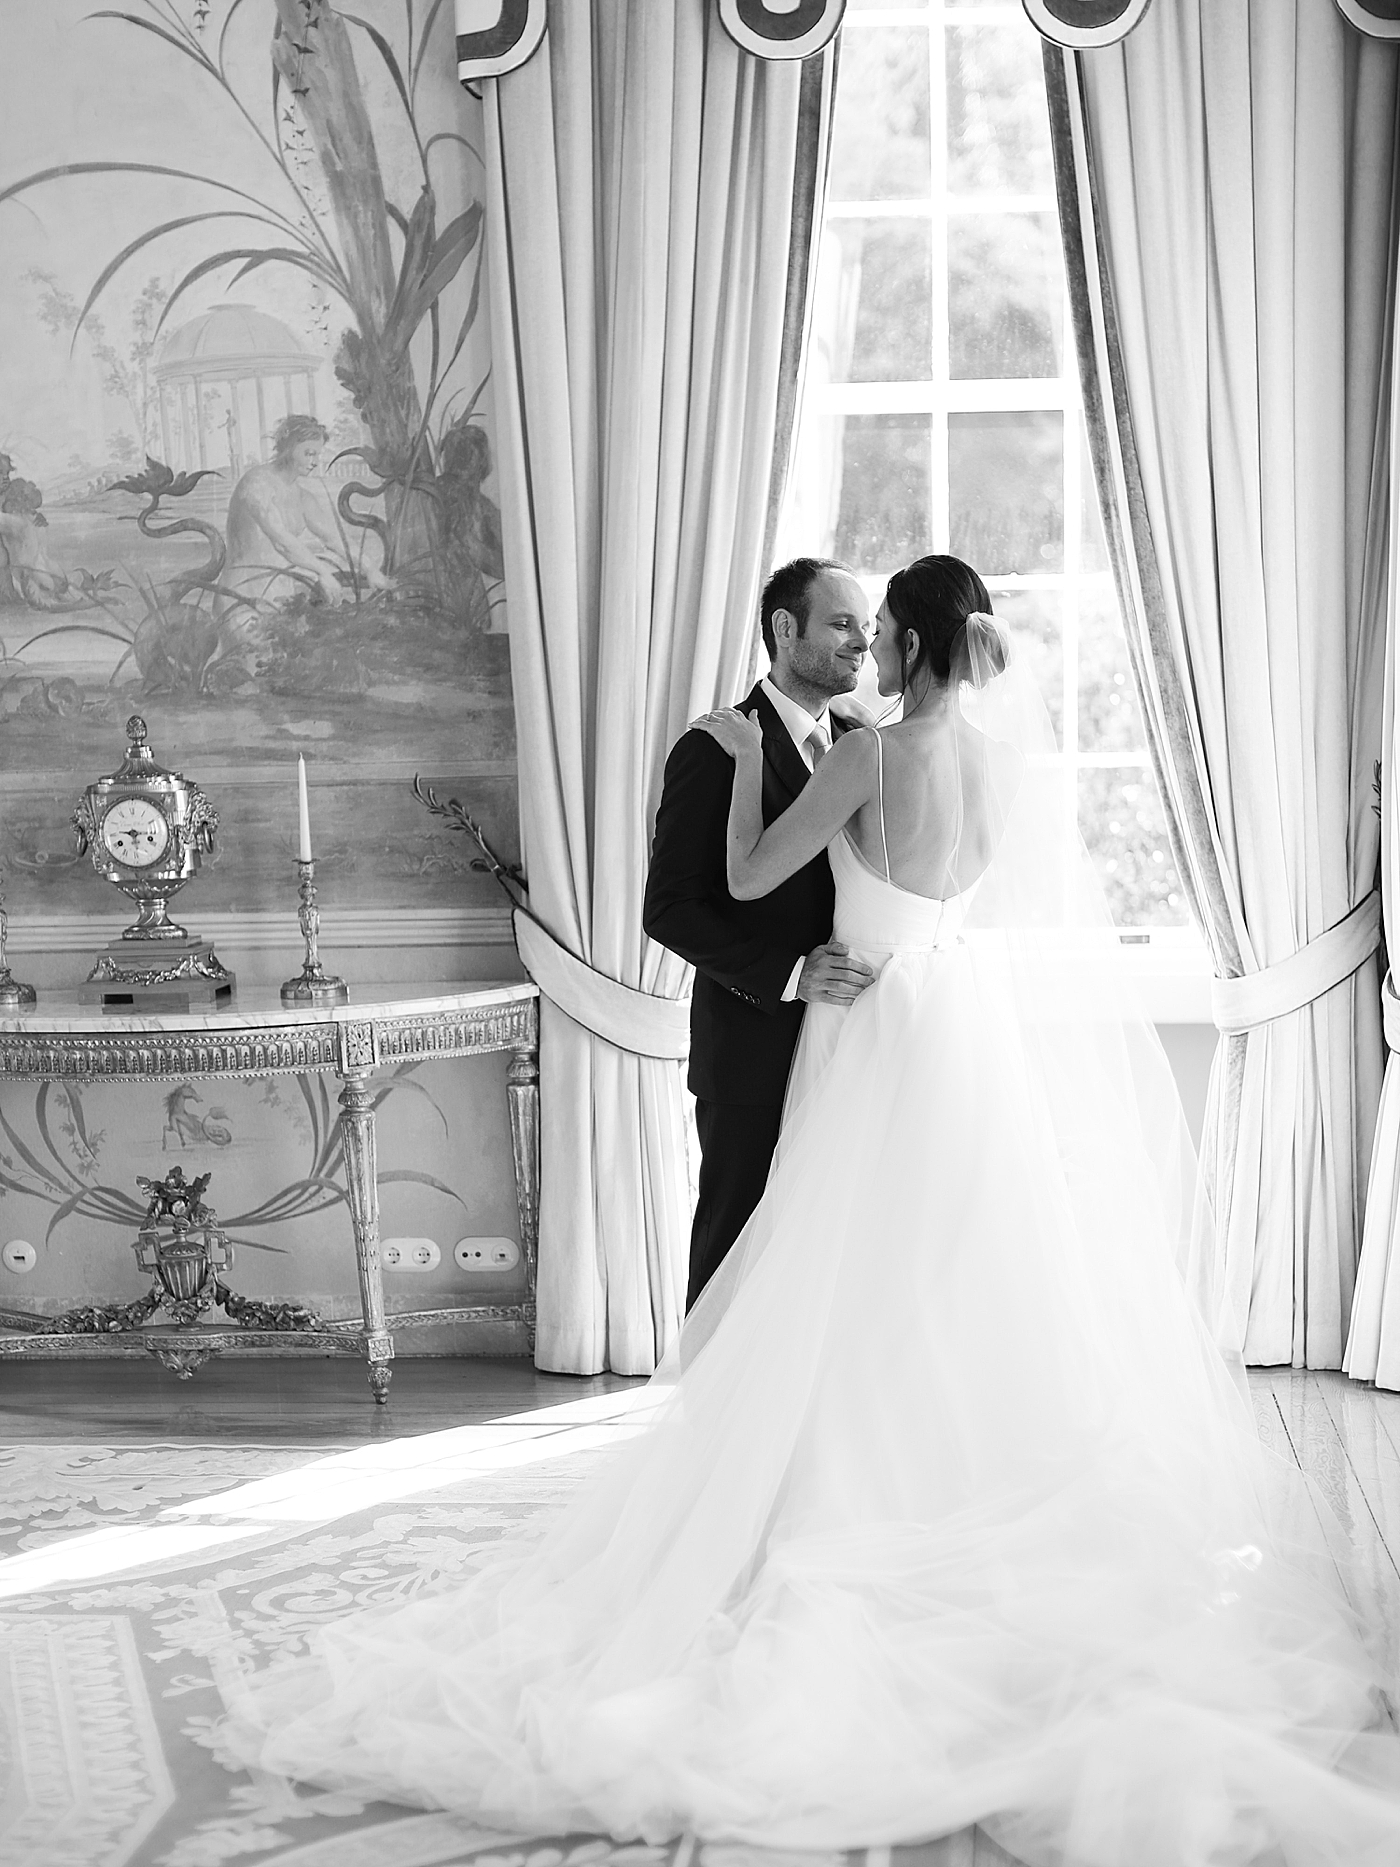 Black and white image of bride and groom near a window | Image by Diane Sotero Photography